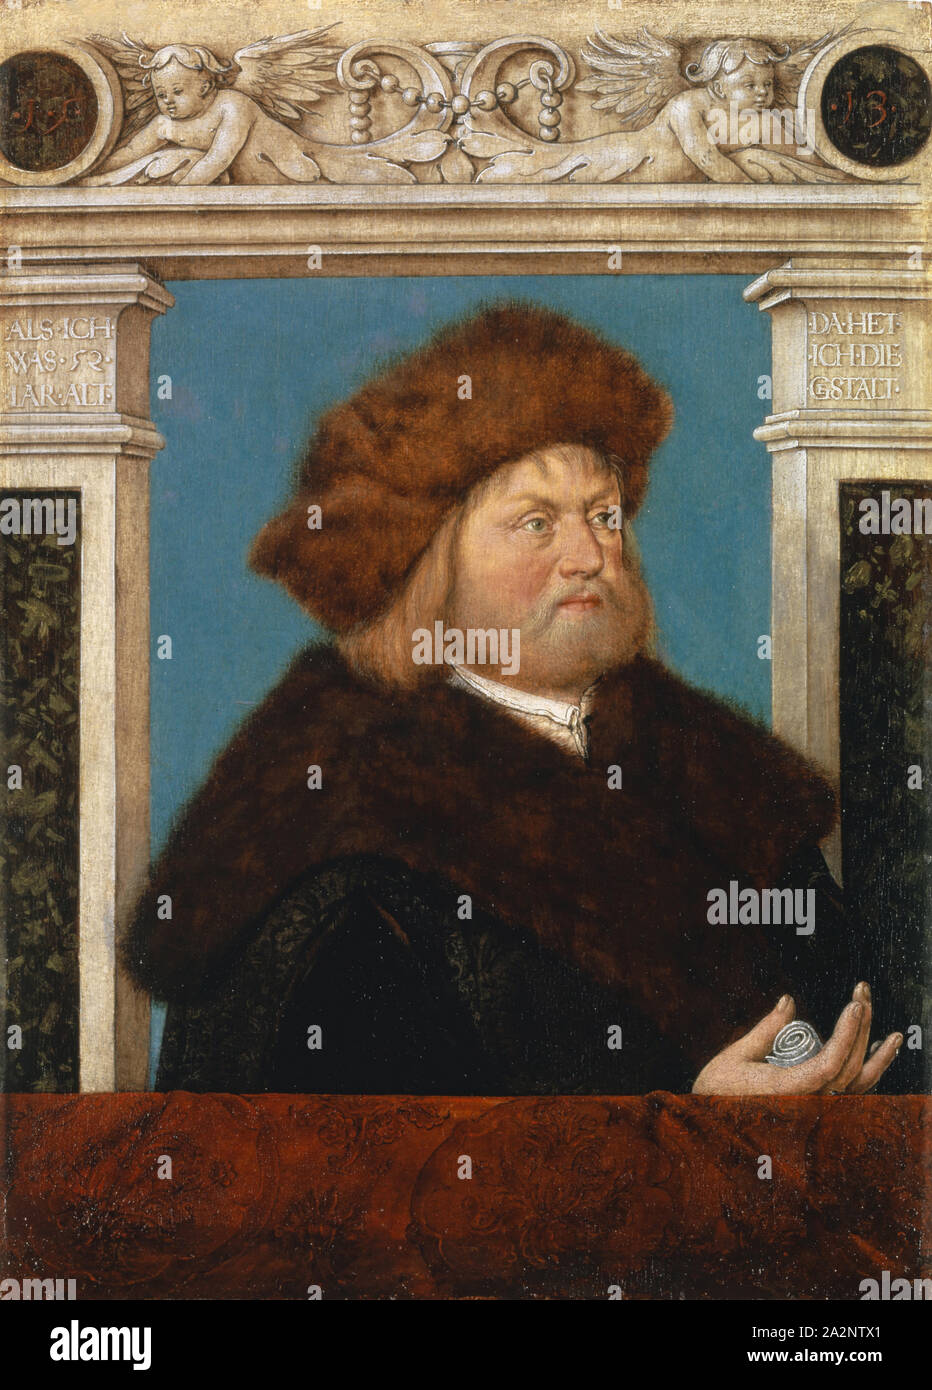 Portrait of Philipp Adler, 1513, oil on linden (?) Wood, 41.3 x 29.5 cm, Not marked but dated: In the locket medallions the year: • 1 • 5 •, • 13 •, on the capitals: ALS • ICH • WHAT • 52 • IAR • OLD • (left), DA • HET • I • THE • G (e) STALT • (right), Hans Holbein d. Ä., Augsburg um 1460/65–1524 Stock Photo